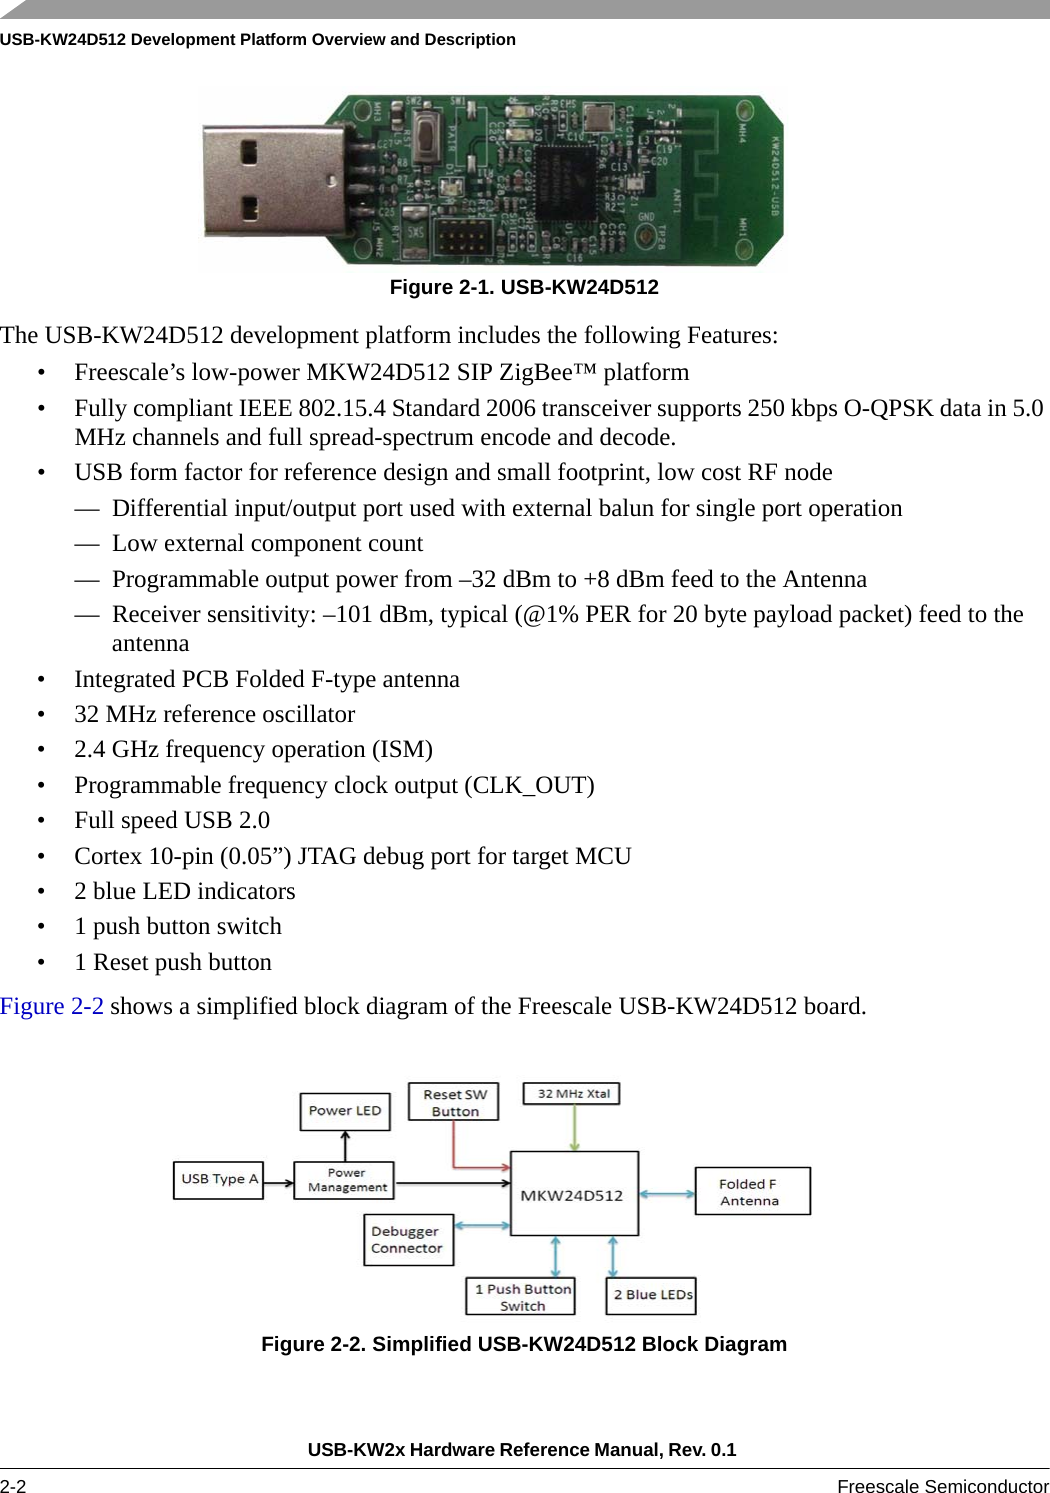 USB-KW24D512 Development Platform Overview and DescriptionUSB-KW2x Hardware Reference Manual, Rev. 0.1 2-2 Freescale SemiconductorFigure 2-1. USB-KW24D512The USB-KW24D512 development platform includes the following Features:• Freescale’s low-power MKW24D512 SIP ZigBee™ platform• Fully compliant IEEE 802.15.4 Standard 2006 transceiver supports 250 kbps O-QPSK data in 5.0 MHz channels and full spread-spectrum encode and decode.• USB form factor for reference design and small footprint, low cost RF node— Differential input/output port used with external balun for single port operation— Low external component count — Programmable output power from –32 dBm to +8 dBm feed to the Antenna— Receiver sensitivity: –101 dBm, typical (@1% PER for 20 byte payload packet) feed to the antenna• Integrated PCB Folded F-type antenna• 32 MHz reference oscillator• 2.4 GHz frequency operation (ISM)• Programmable frequency clock output (CLK_OUT)• Full speed USB 2.0 • Cortex 10-pin (0.05”) JTAG debug port for target MCU• 2 blue LED indicators• 1 push button switch• 1 Reset push buttonFigure 2-2 shows a simplified block diagram of the Freescale USB-KW24D512 board.Figure 2-2. Simplified USB-KW24D512 Block Diagram 